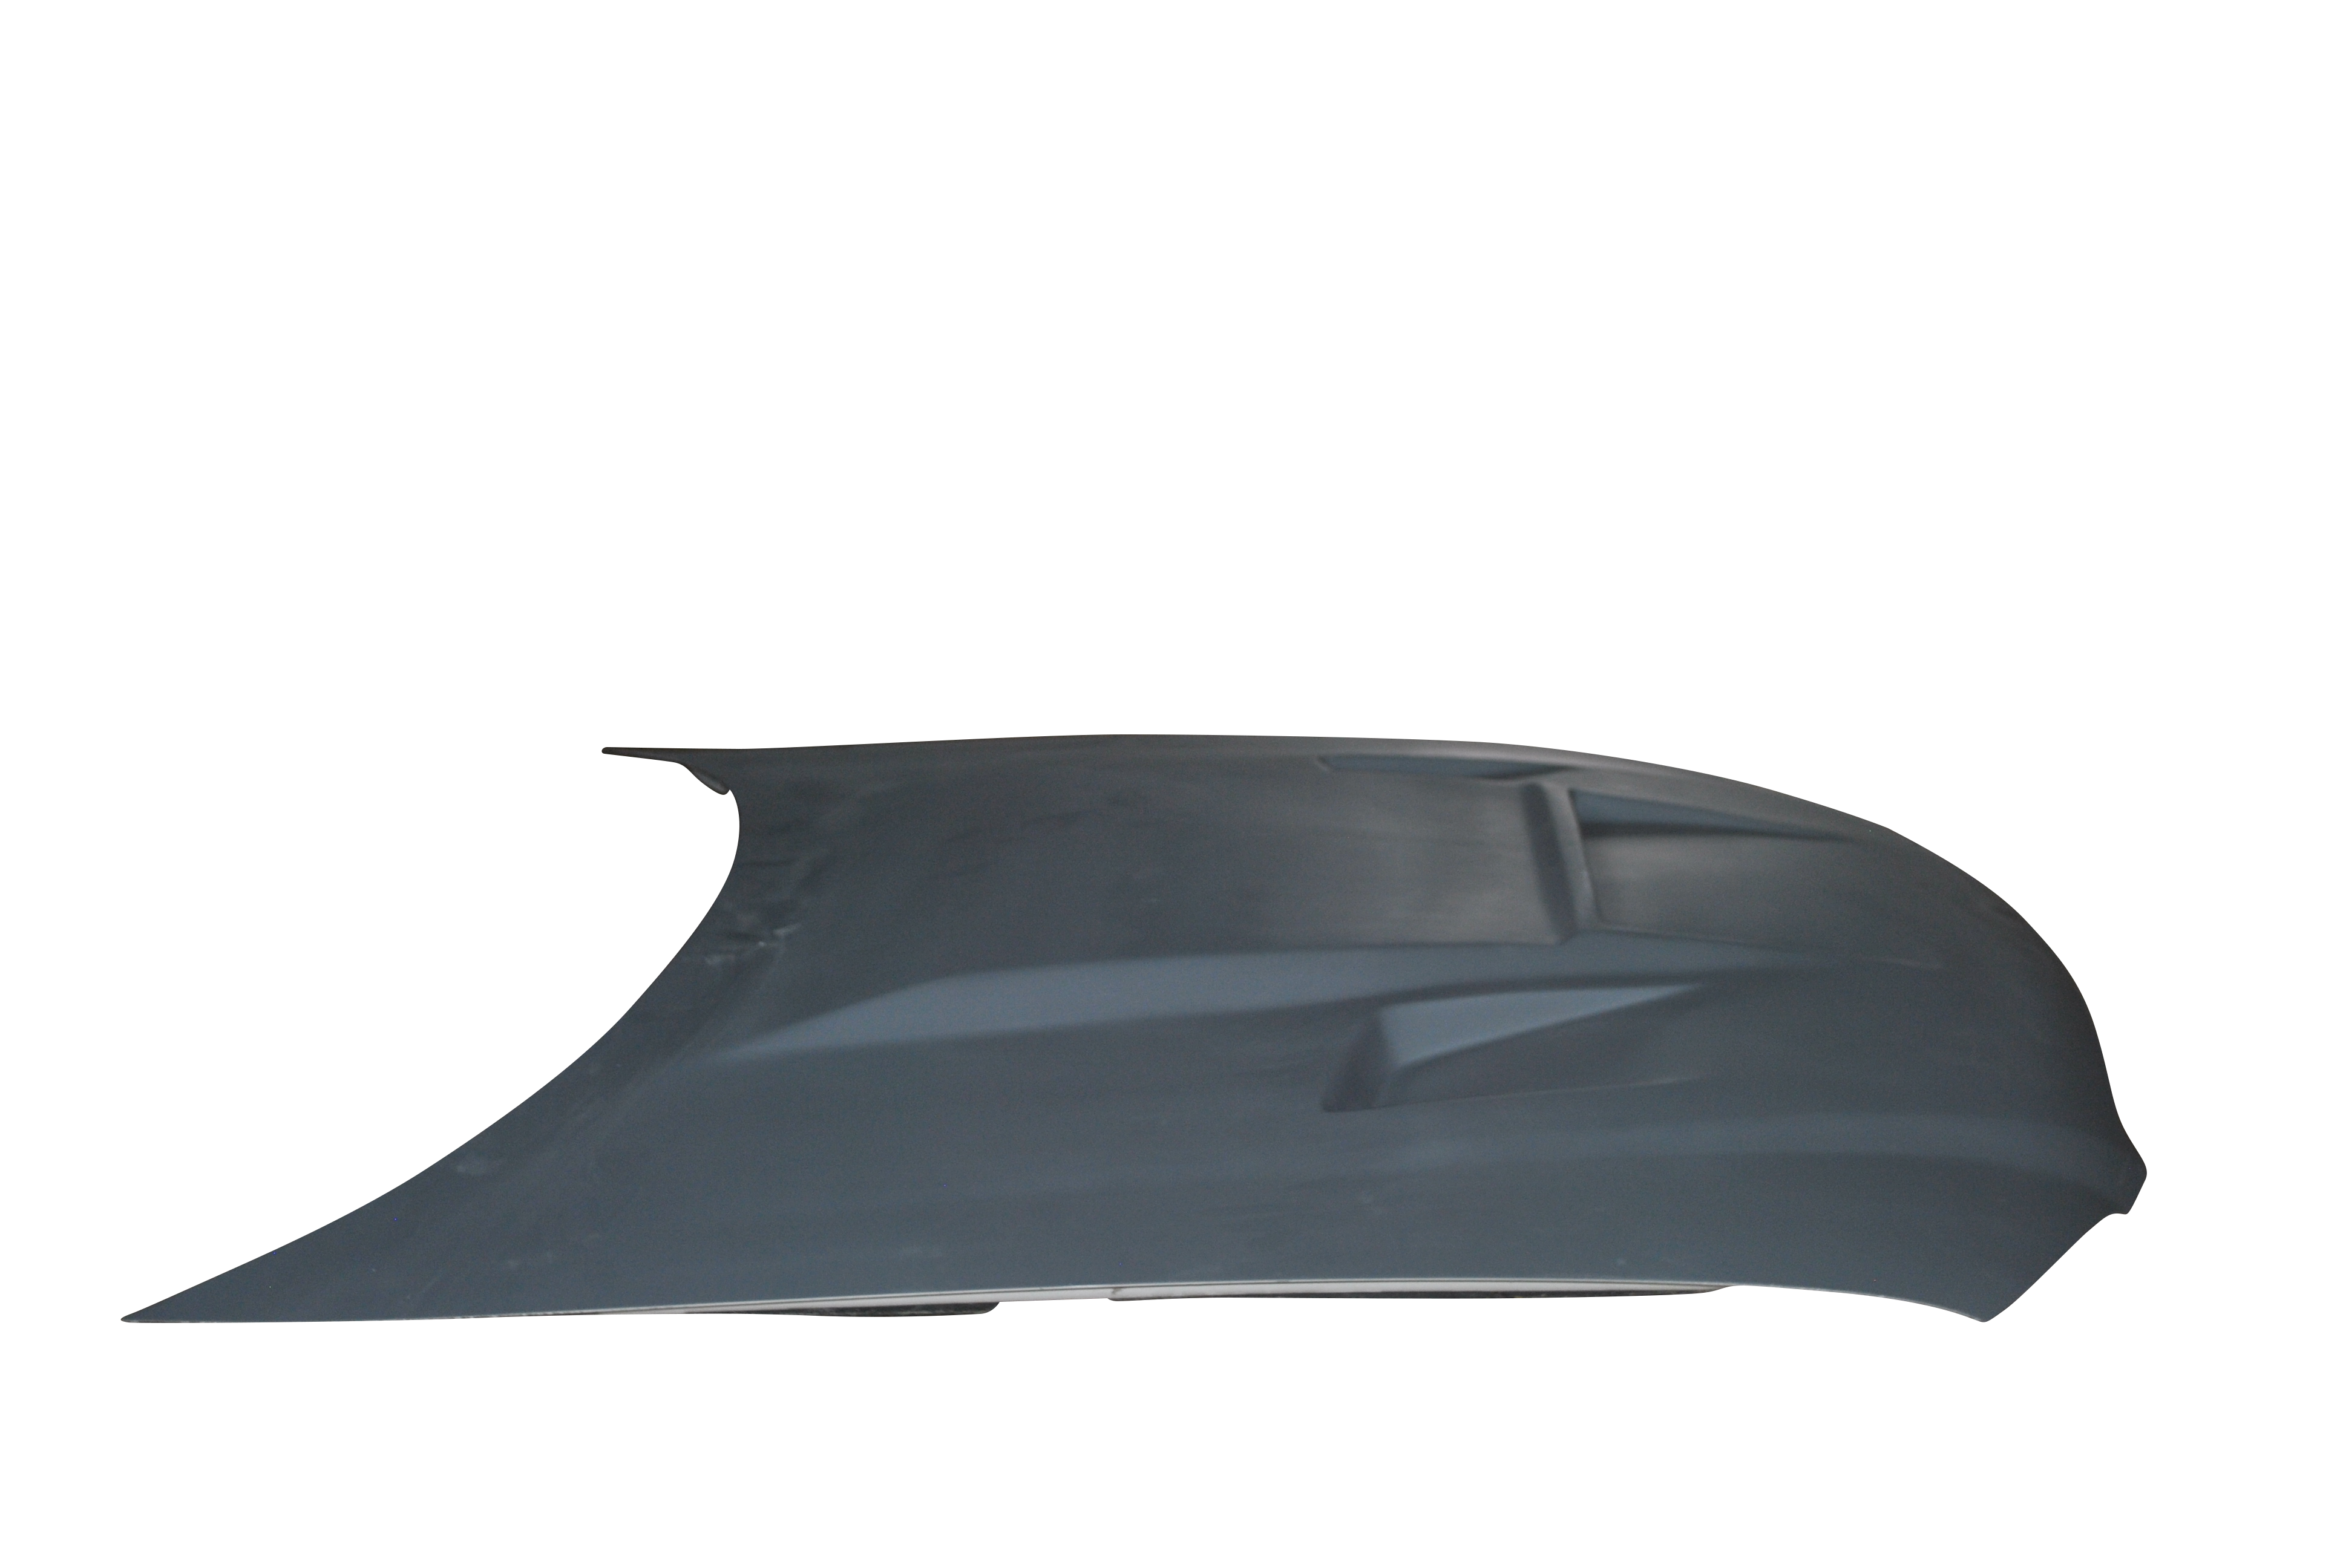 BA steel bonnet with BA Bulge with Slits and Vents Moulded